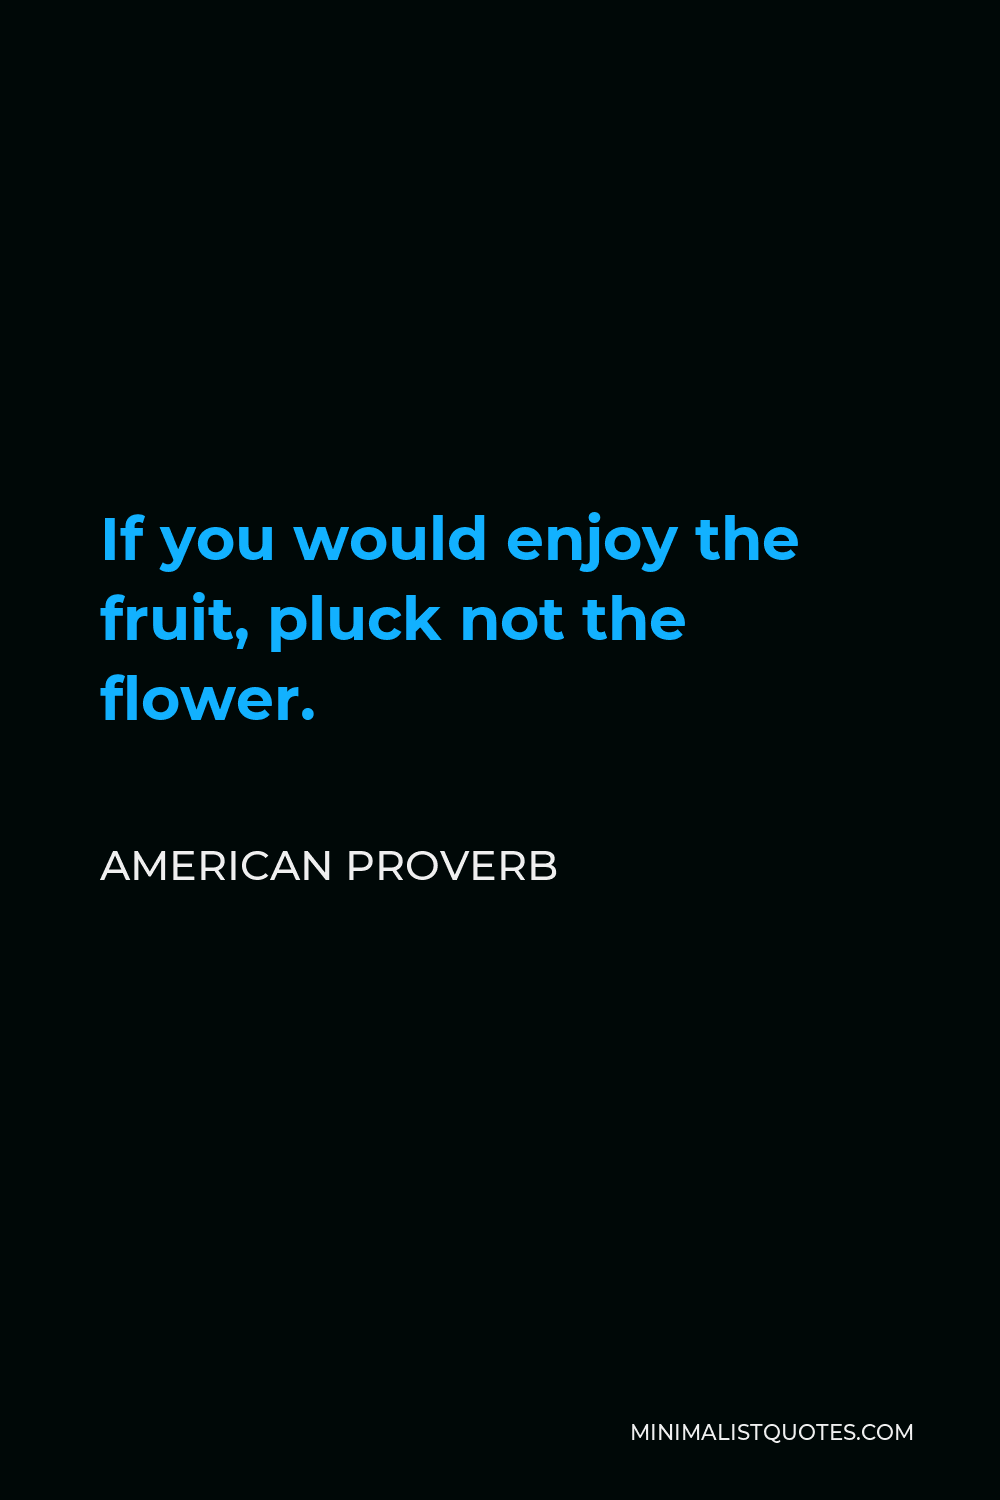 American Proverb Quote - If you would enjoy the fruit, pluck not the flower.